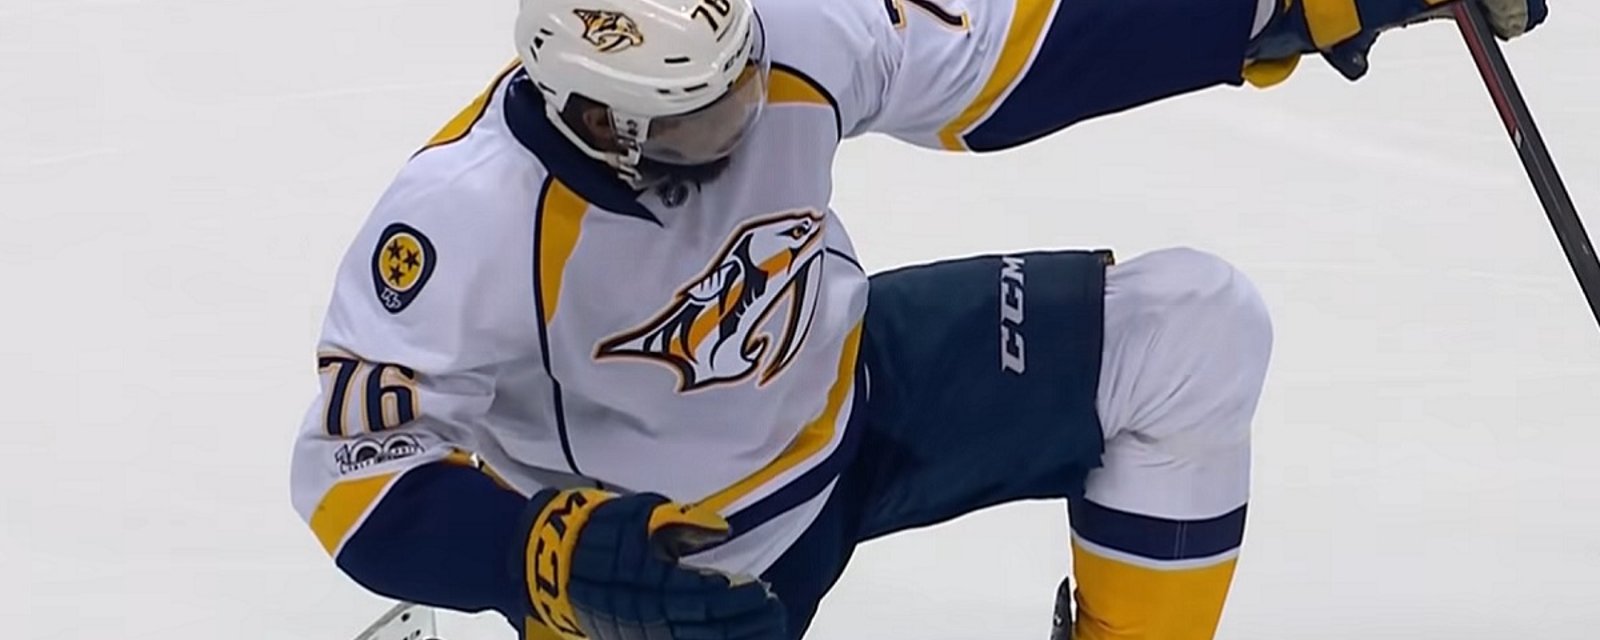 P.K. Subban fires a blast from center ice... and scores!